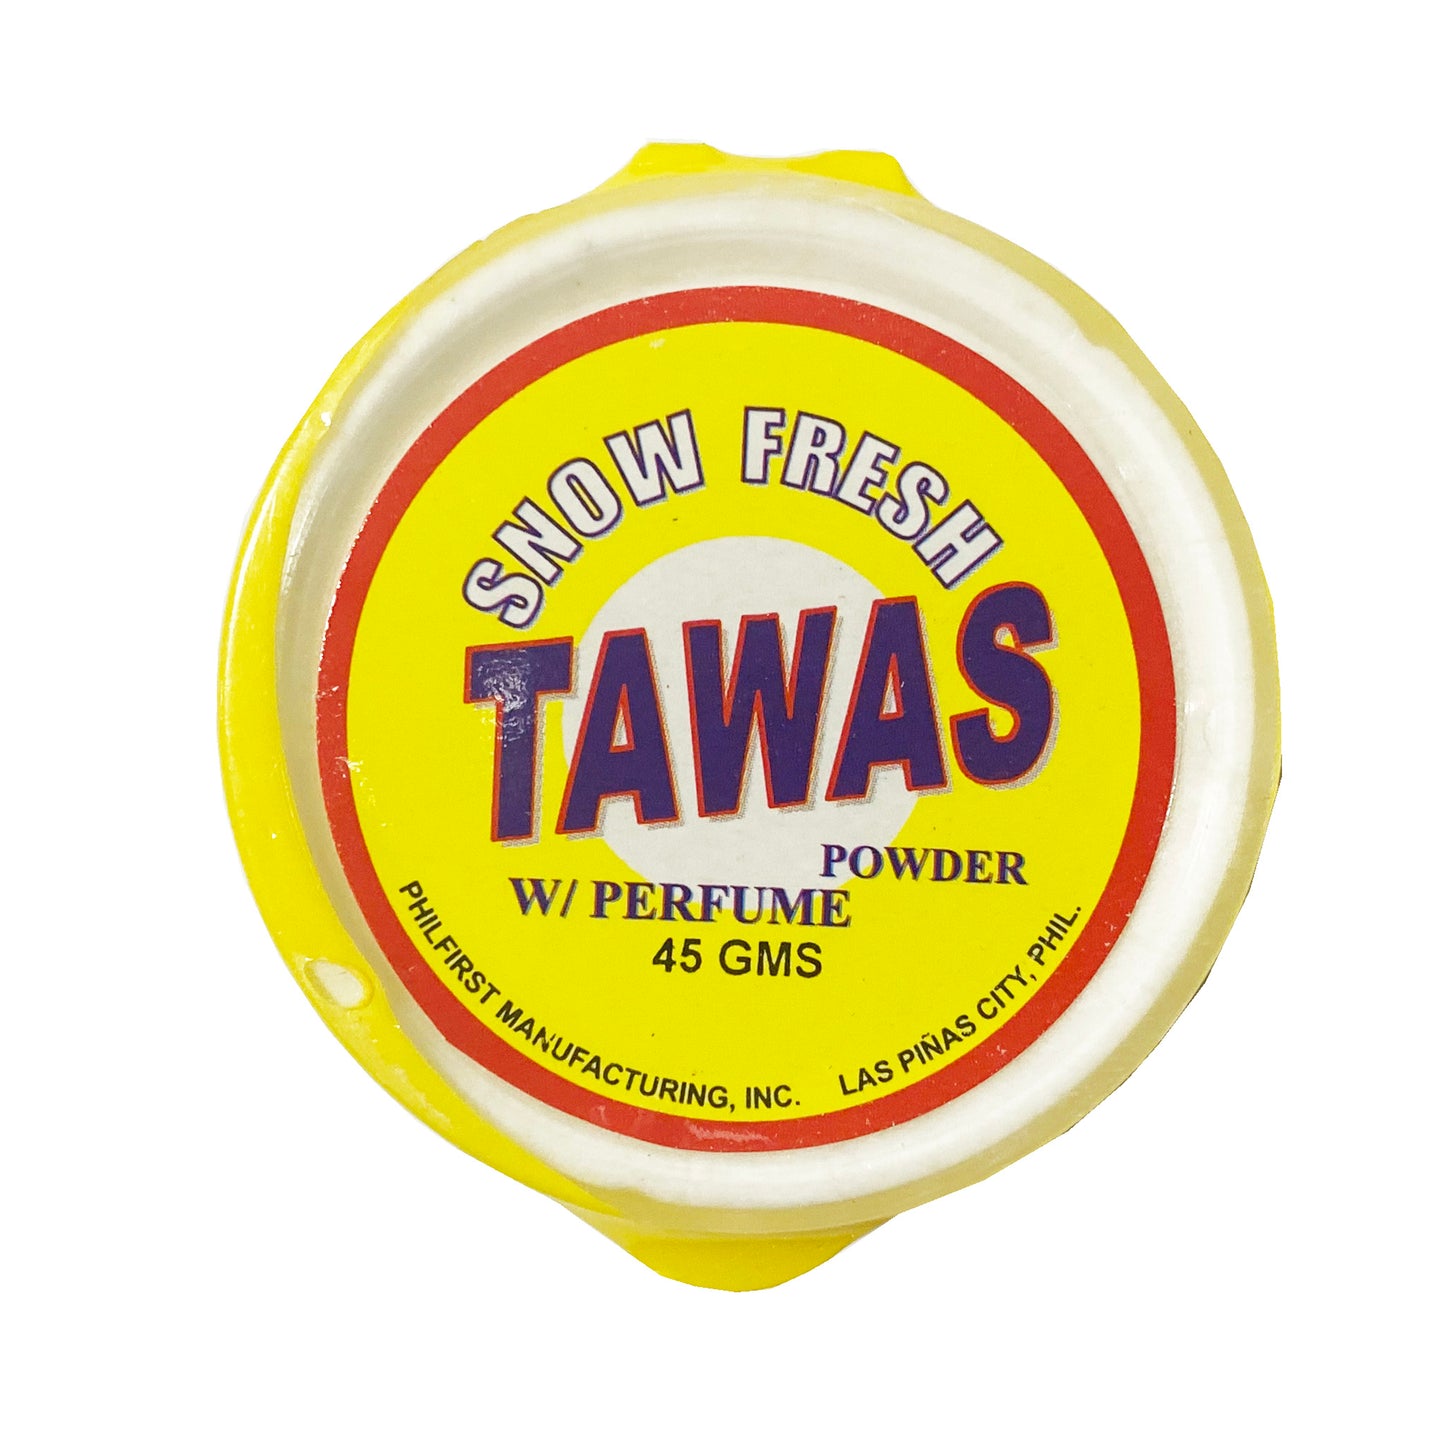 Top graphic view of Snow Fresh Tawas Powder with Perfume 1.58oz